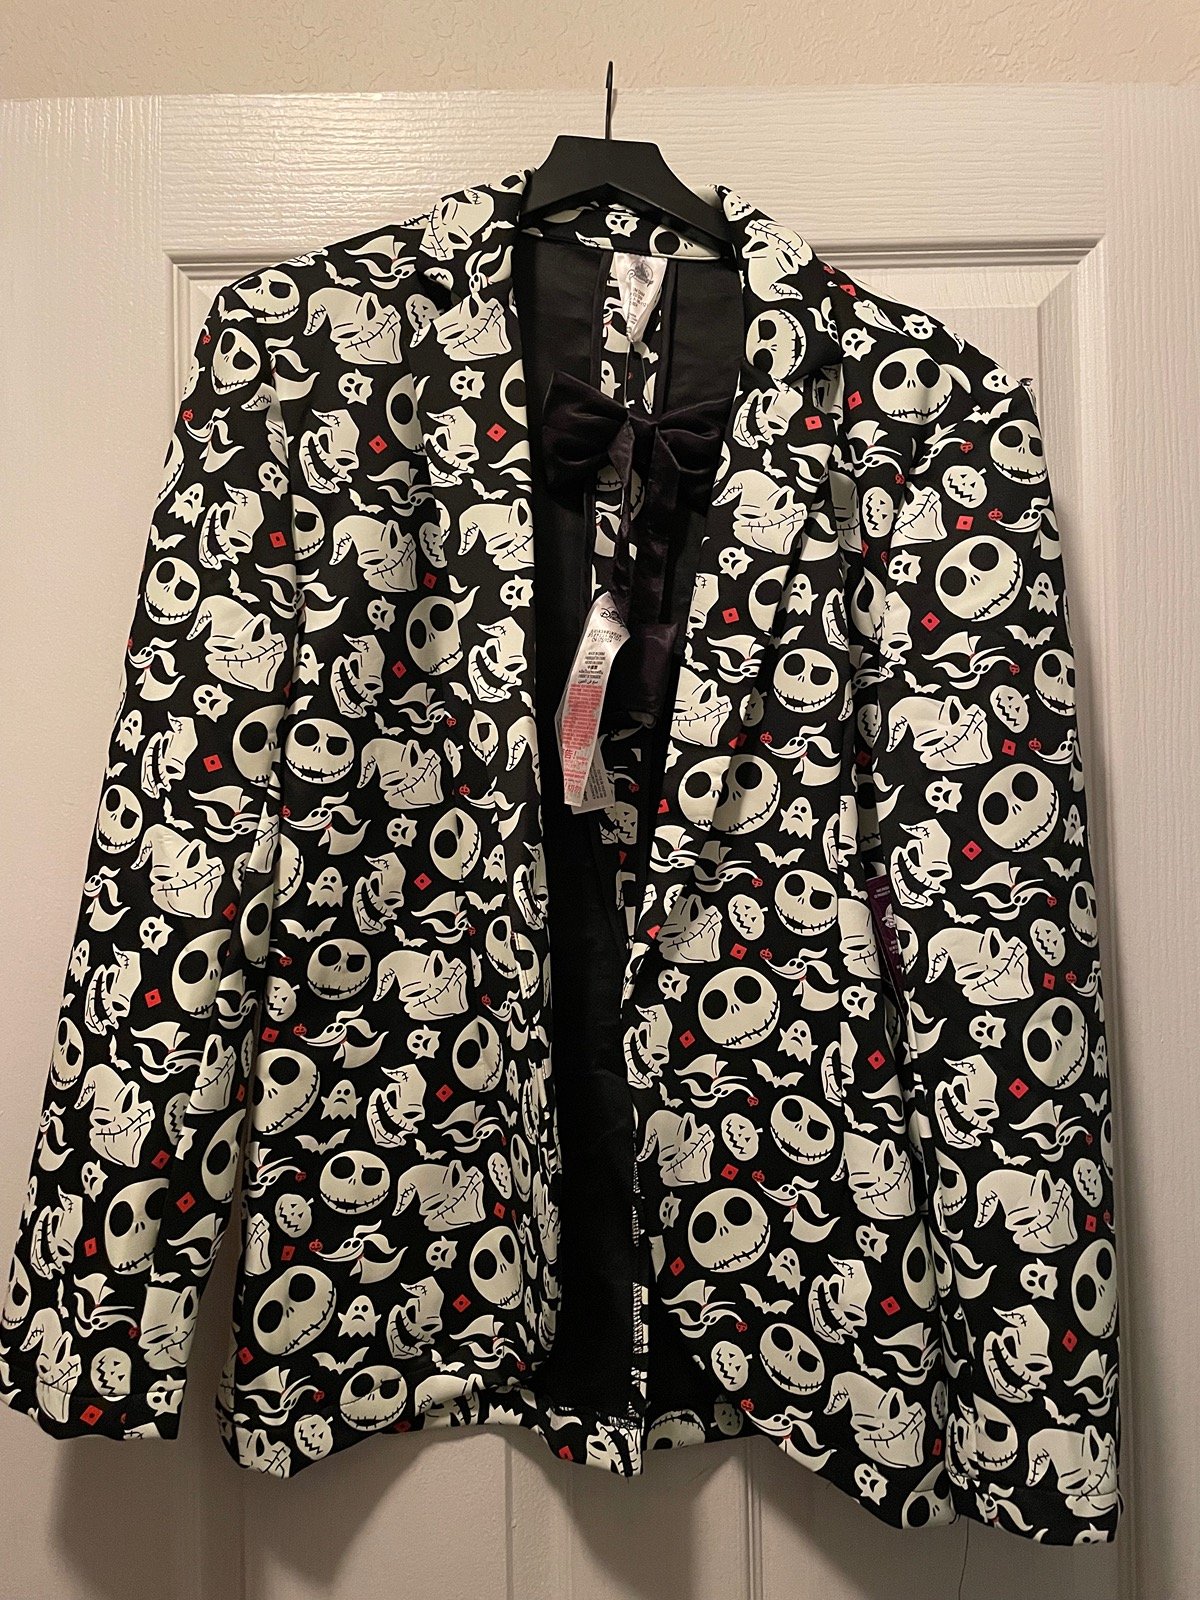 The Nightmare Before Christmas Glow-in-the-Dark Half Suit and Light-Up Tie j7S4iE6L6